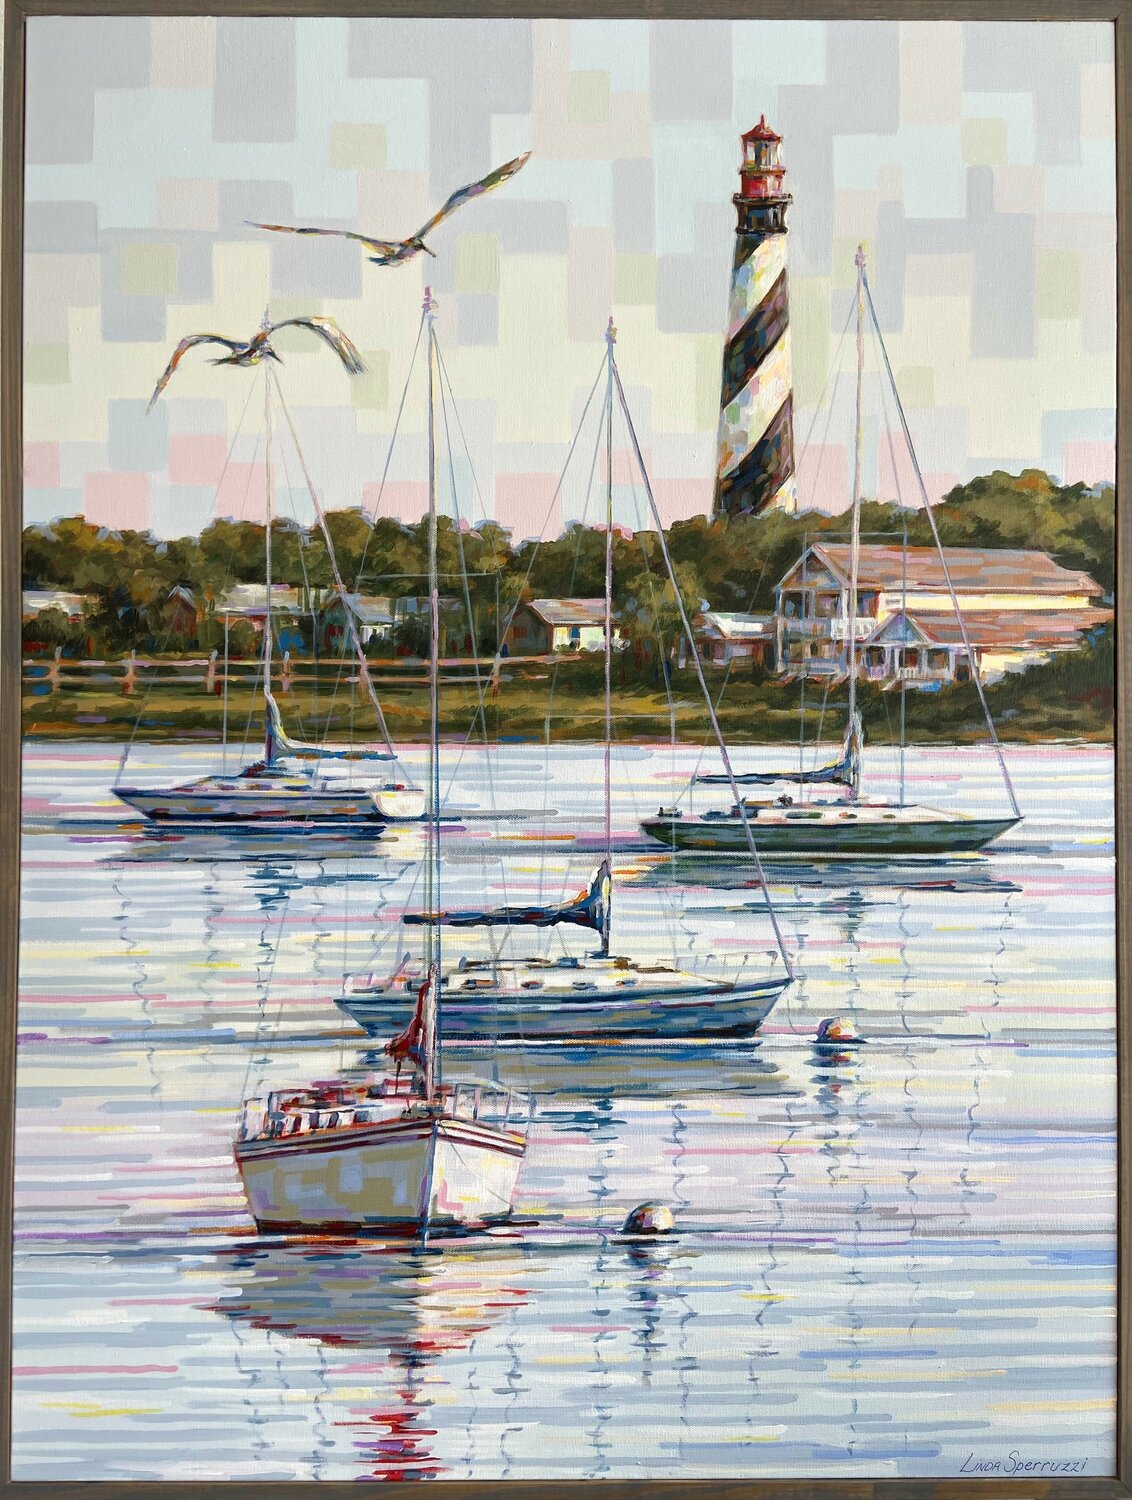 “Peaceful Views Of The St. Augustine Lighthouse” is an example of Linda Sperruzzi’s “Modern Impressionism.”